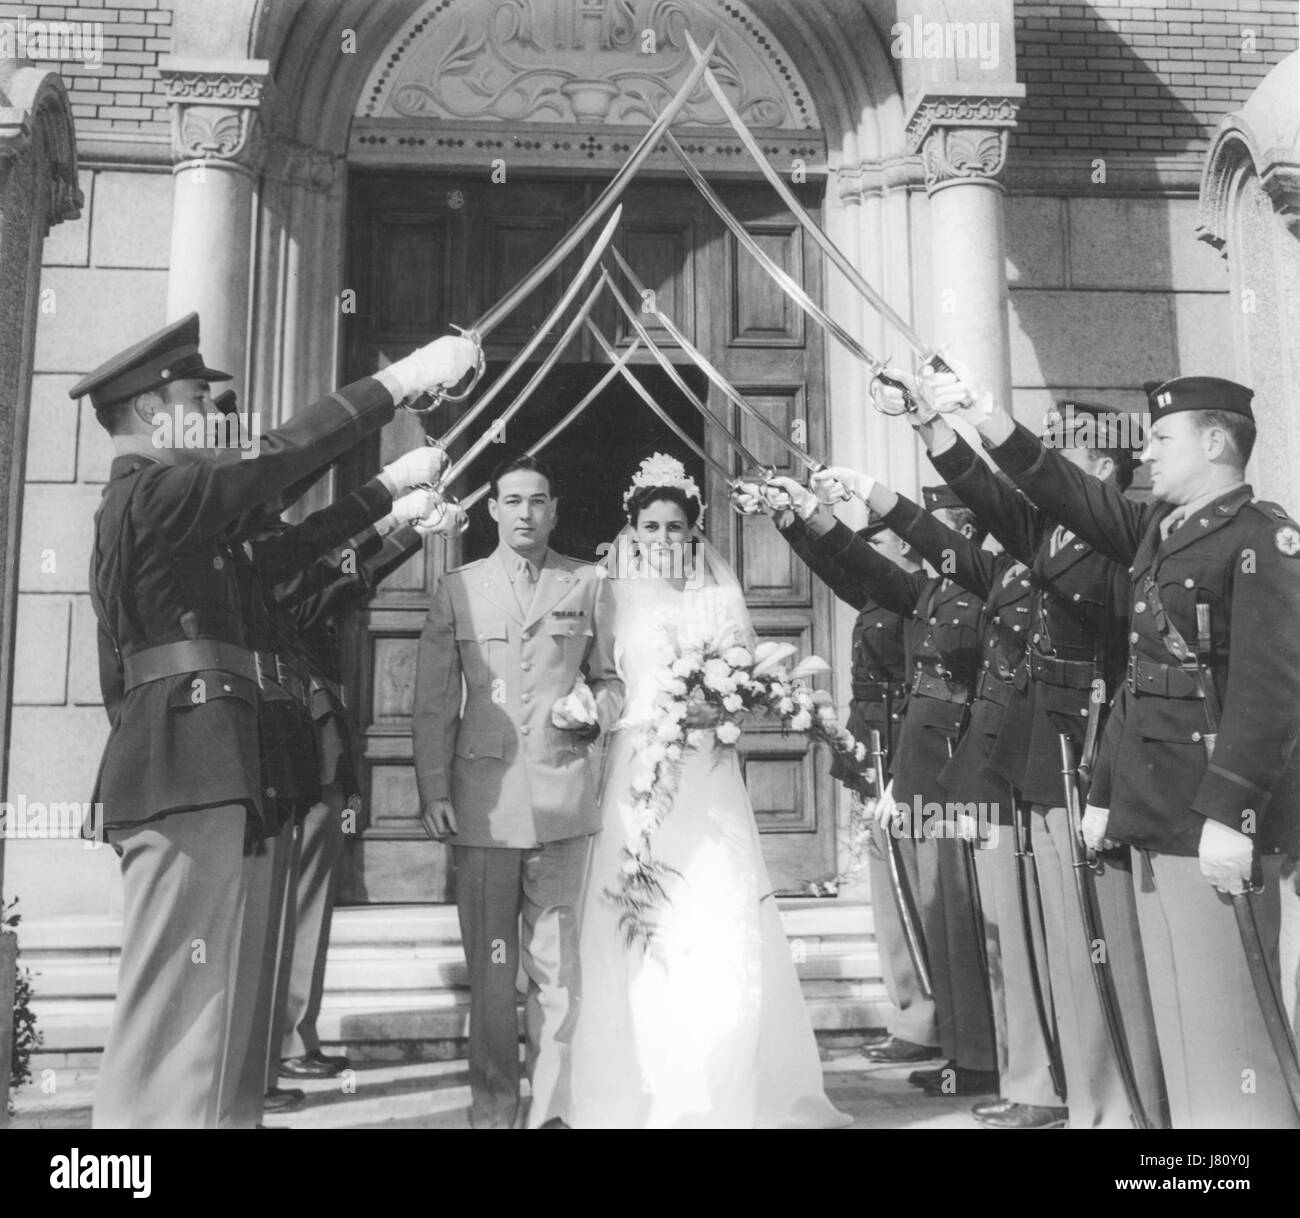 Military Saber Arch Honoring Bride and Groom, 1940's USA Stock Photo